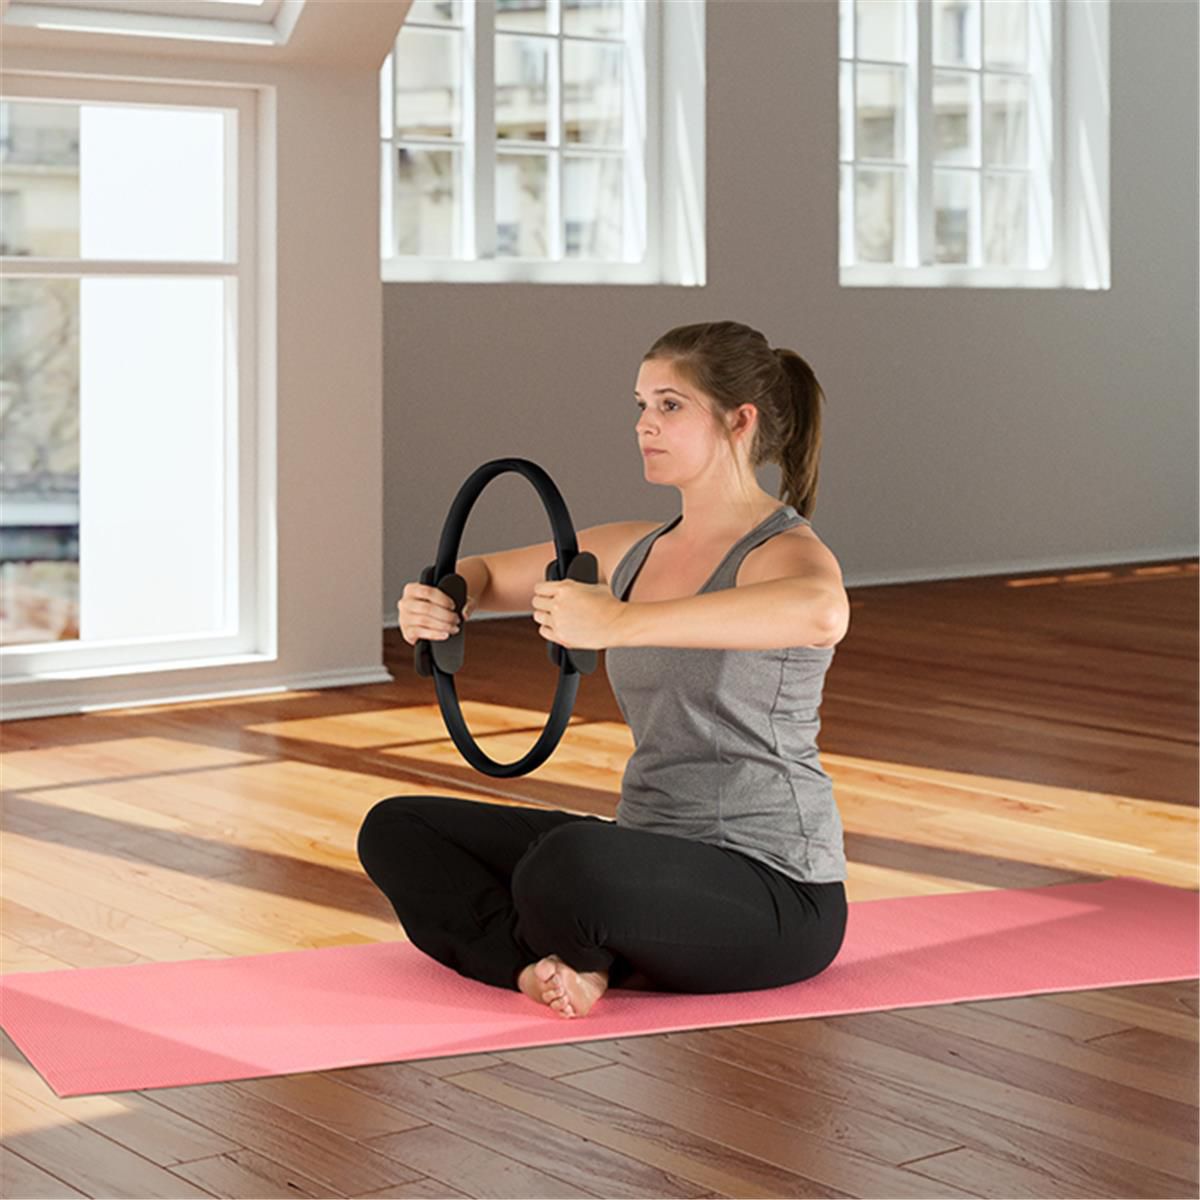 Image for Hey! Play! Wakeman 80-5130-B 15 dia. x 2 in. Fitness Dual Grip Foam Resistance Circle Pilates Toning Ring - Black at Kohl's.